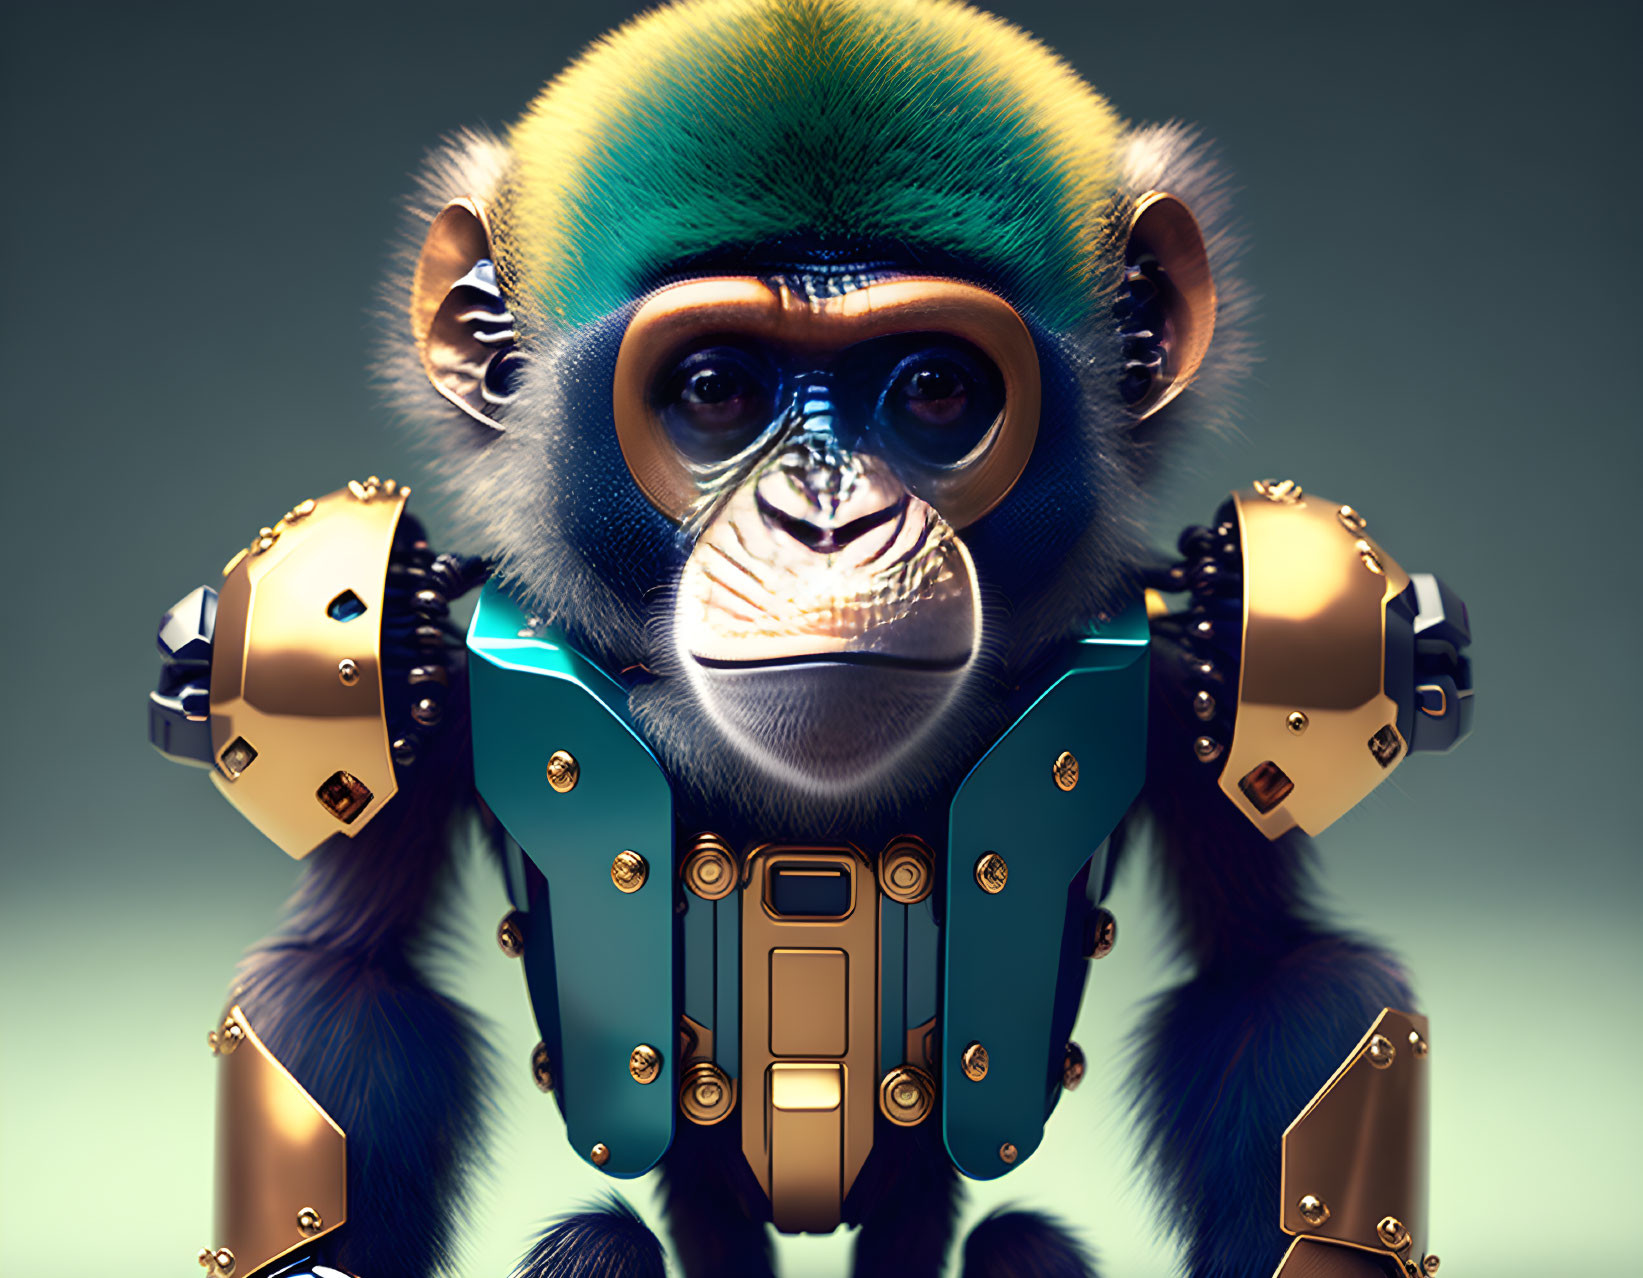 Colorful monkey in futuristic armor staring at viewer